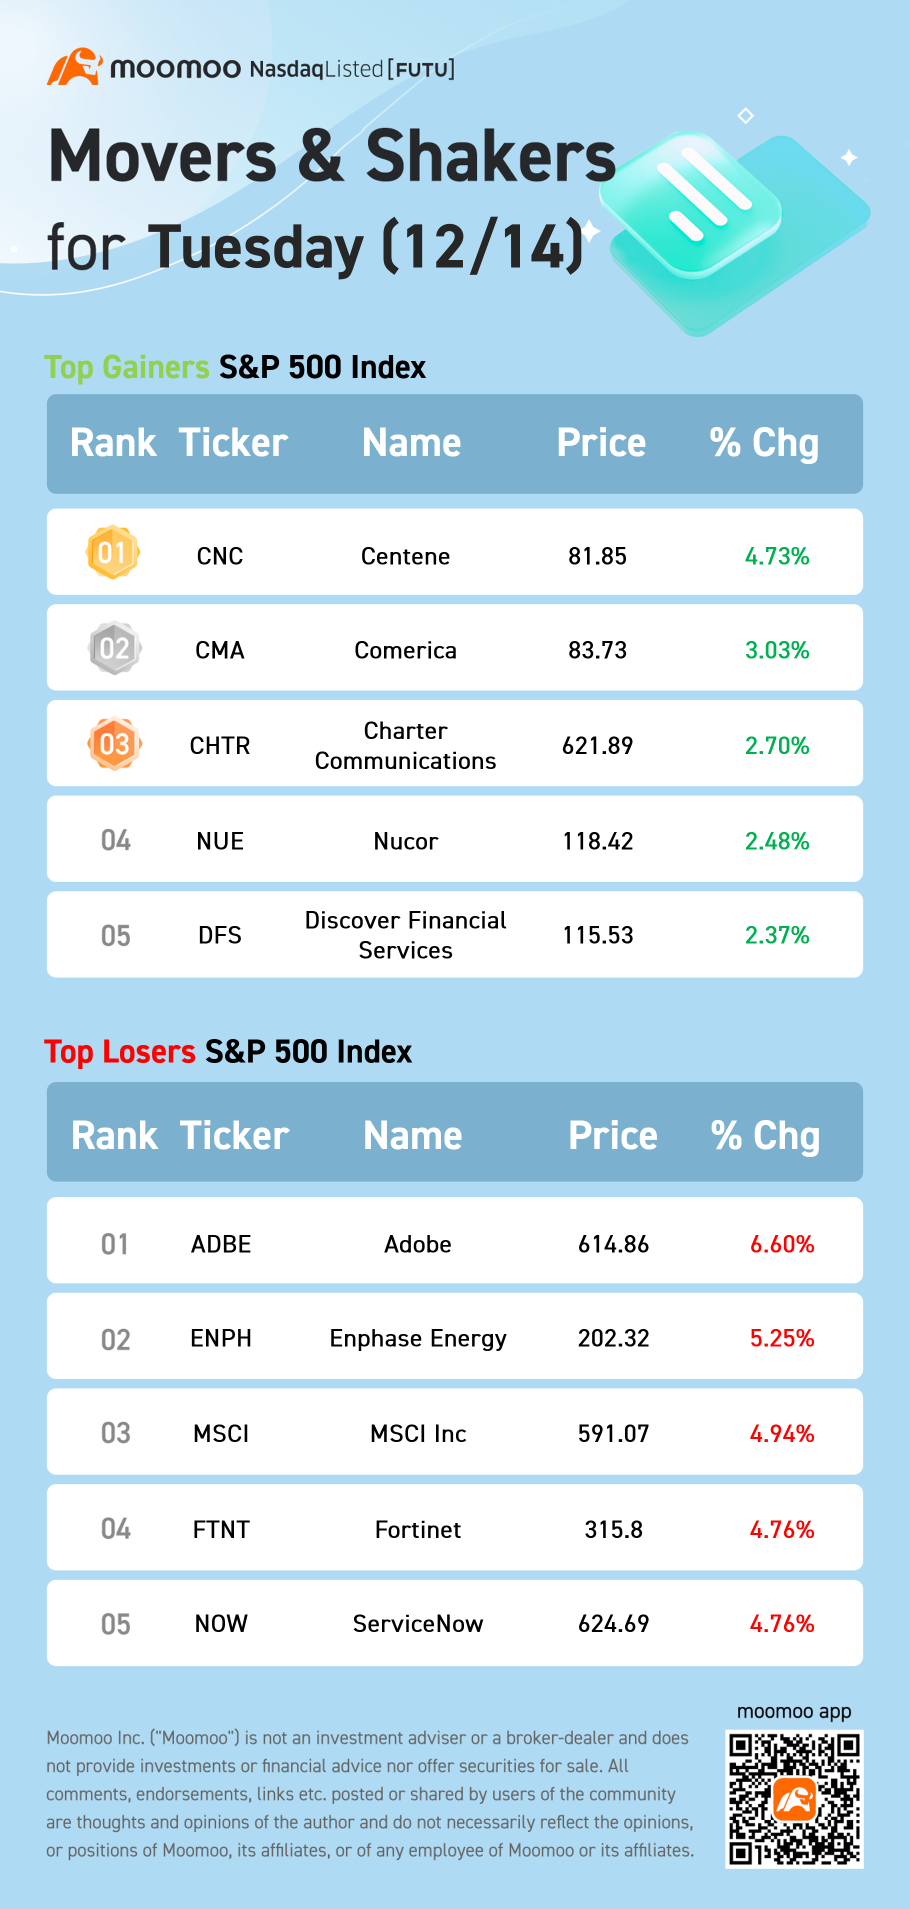 S&P 500 Movers for Tuesday (12/14)